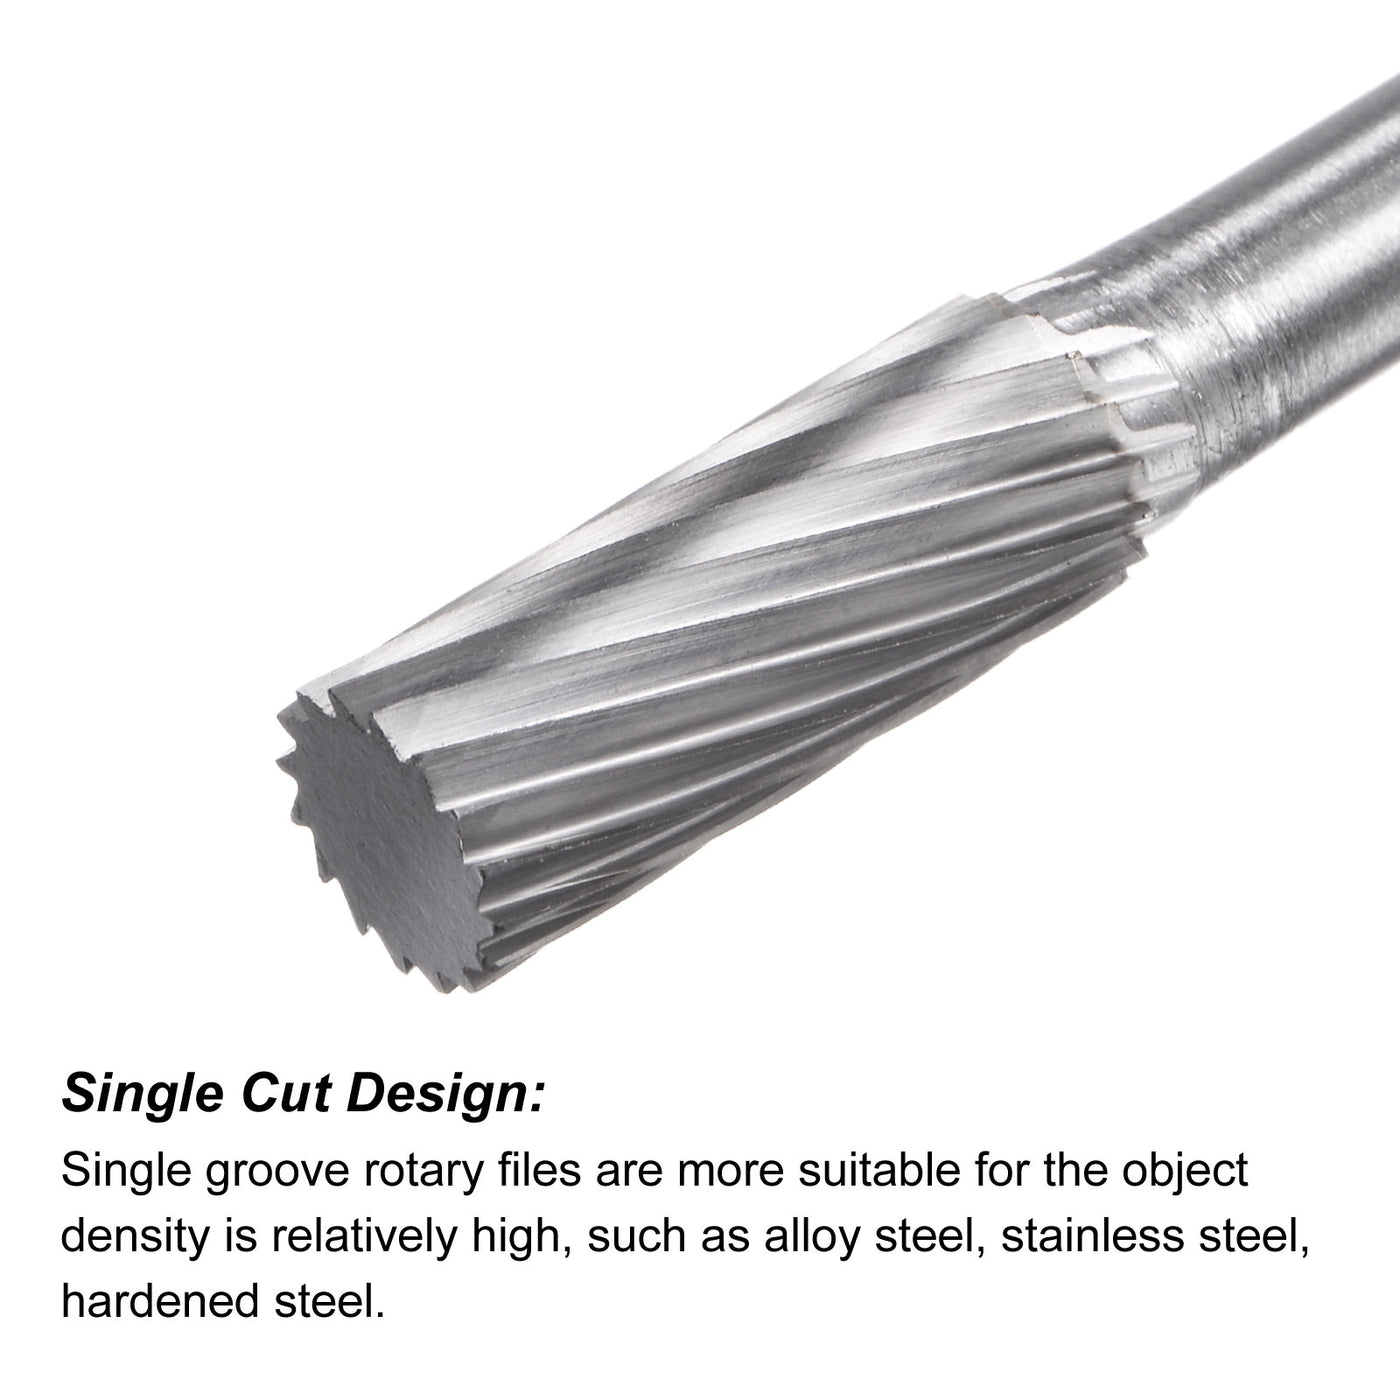 Uxcell Uxcell 10mm x 150mm 6mm Shank Single Cut Cylinder Carbide Tip Rotary Files